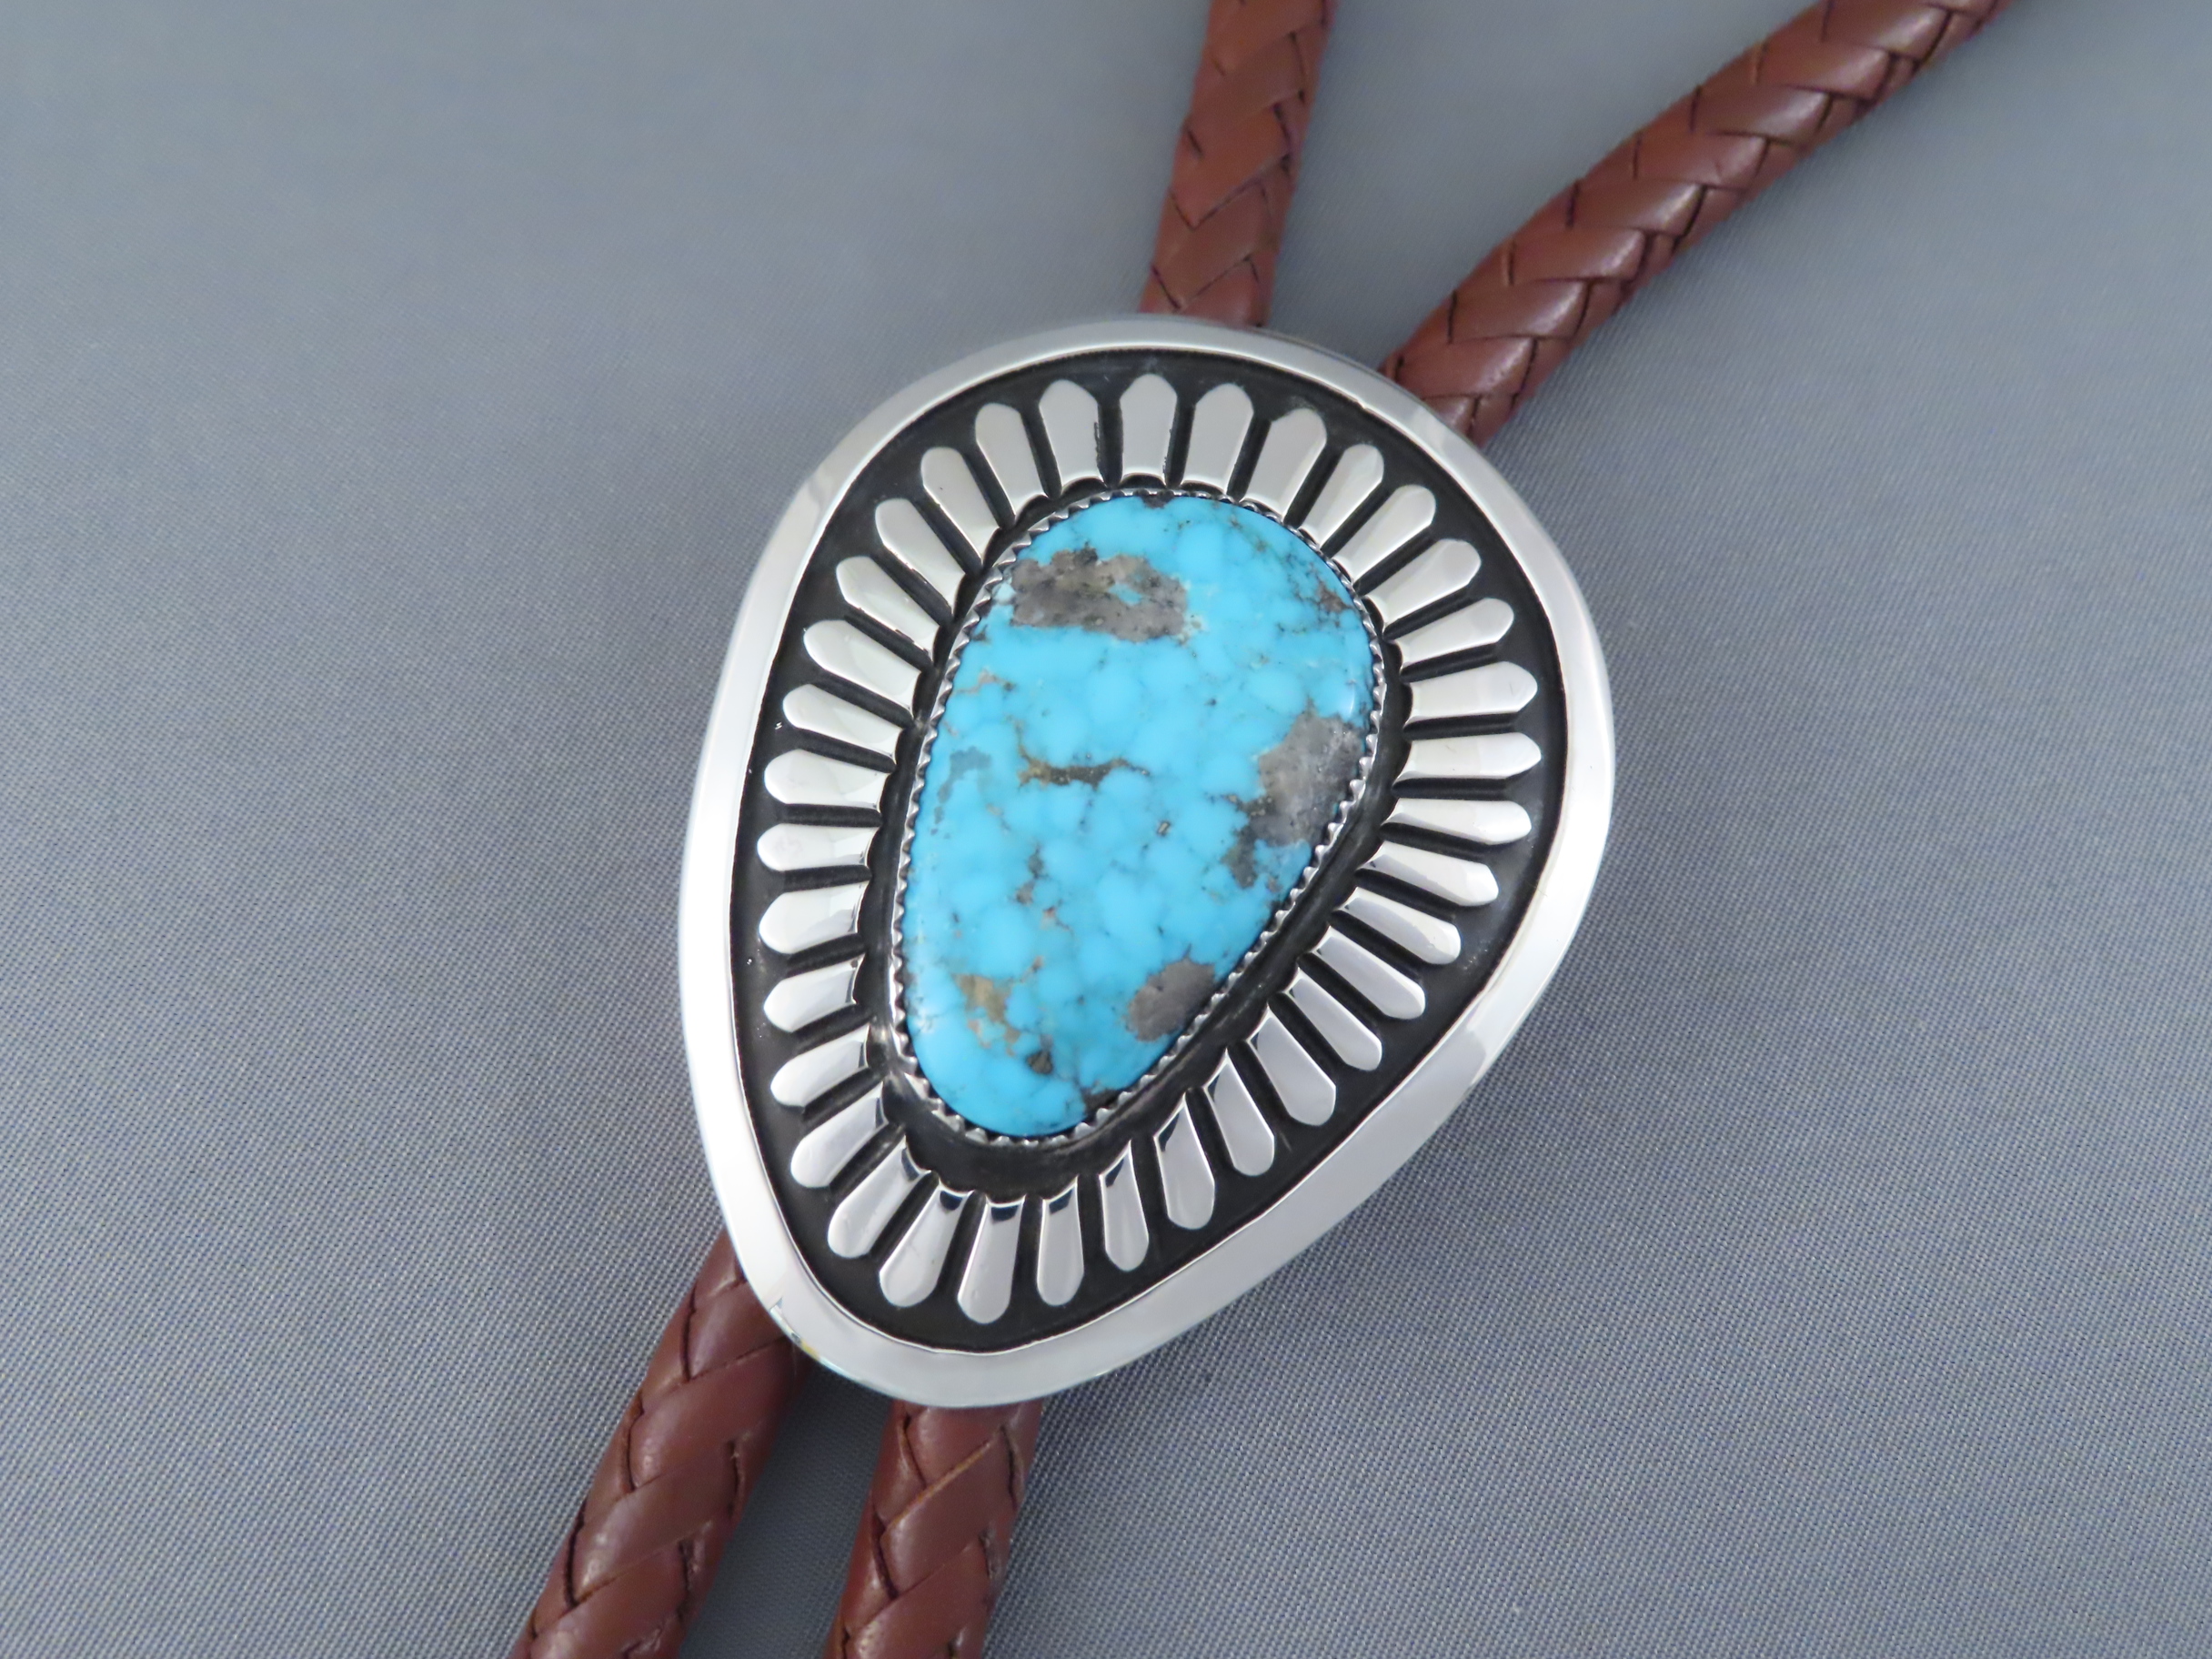 Shop Turquoise Bolo - Morenci Turquoise Bolo Tie by Navajo Indian Jewelry Artist, Gene Jackson FOR SALE $995-